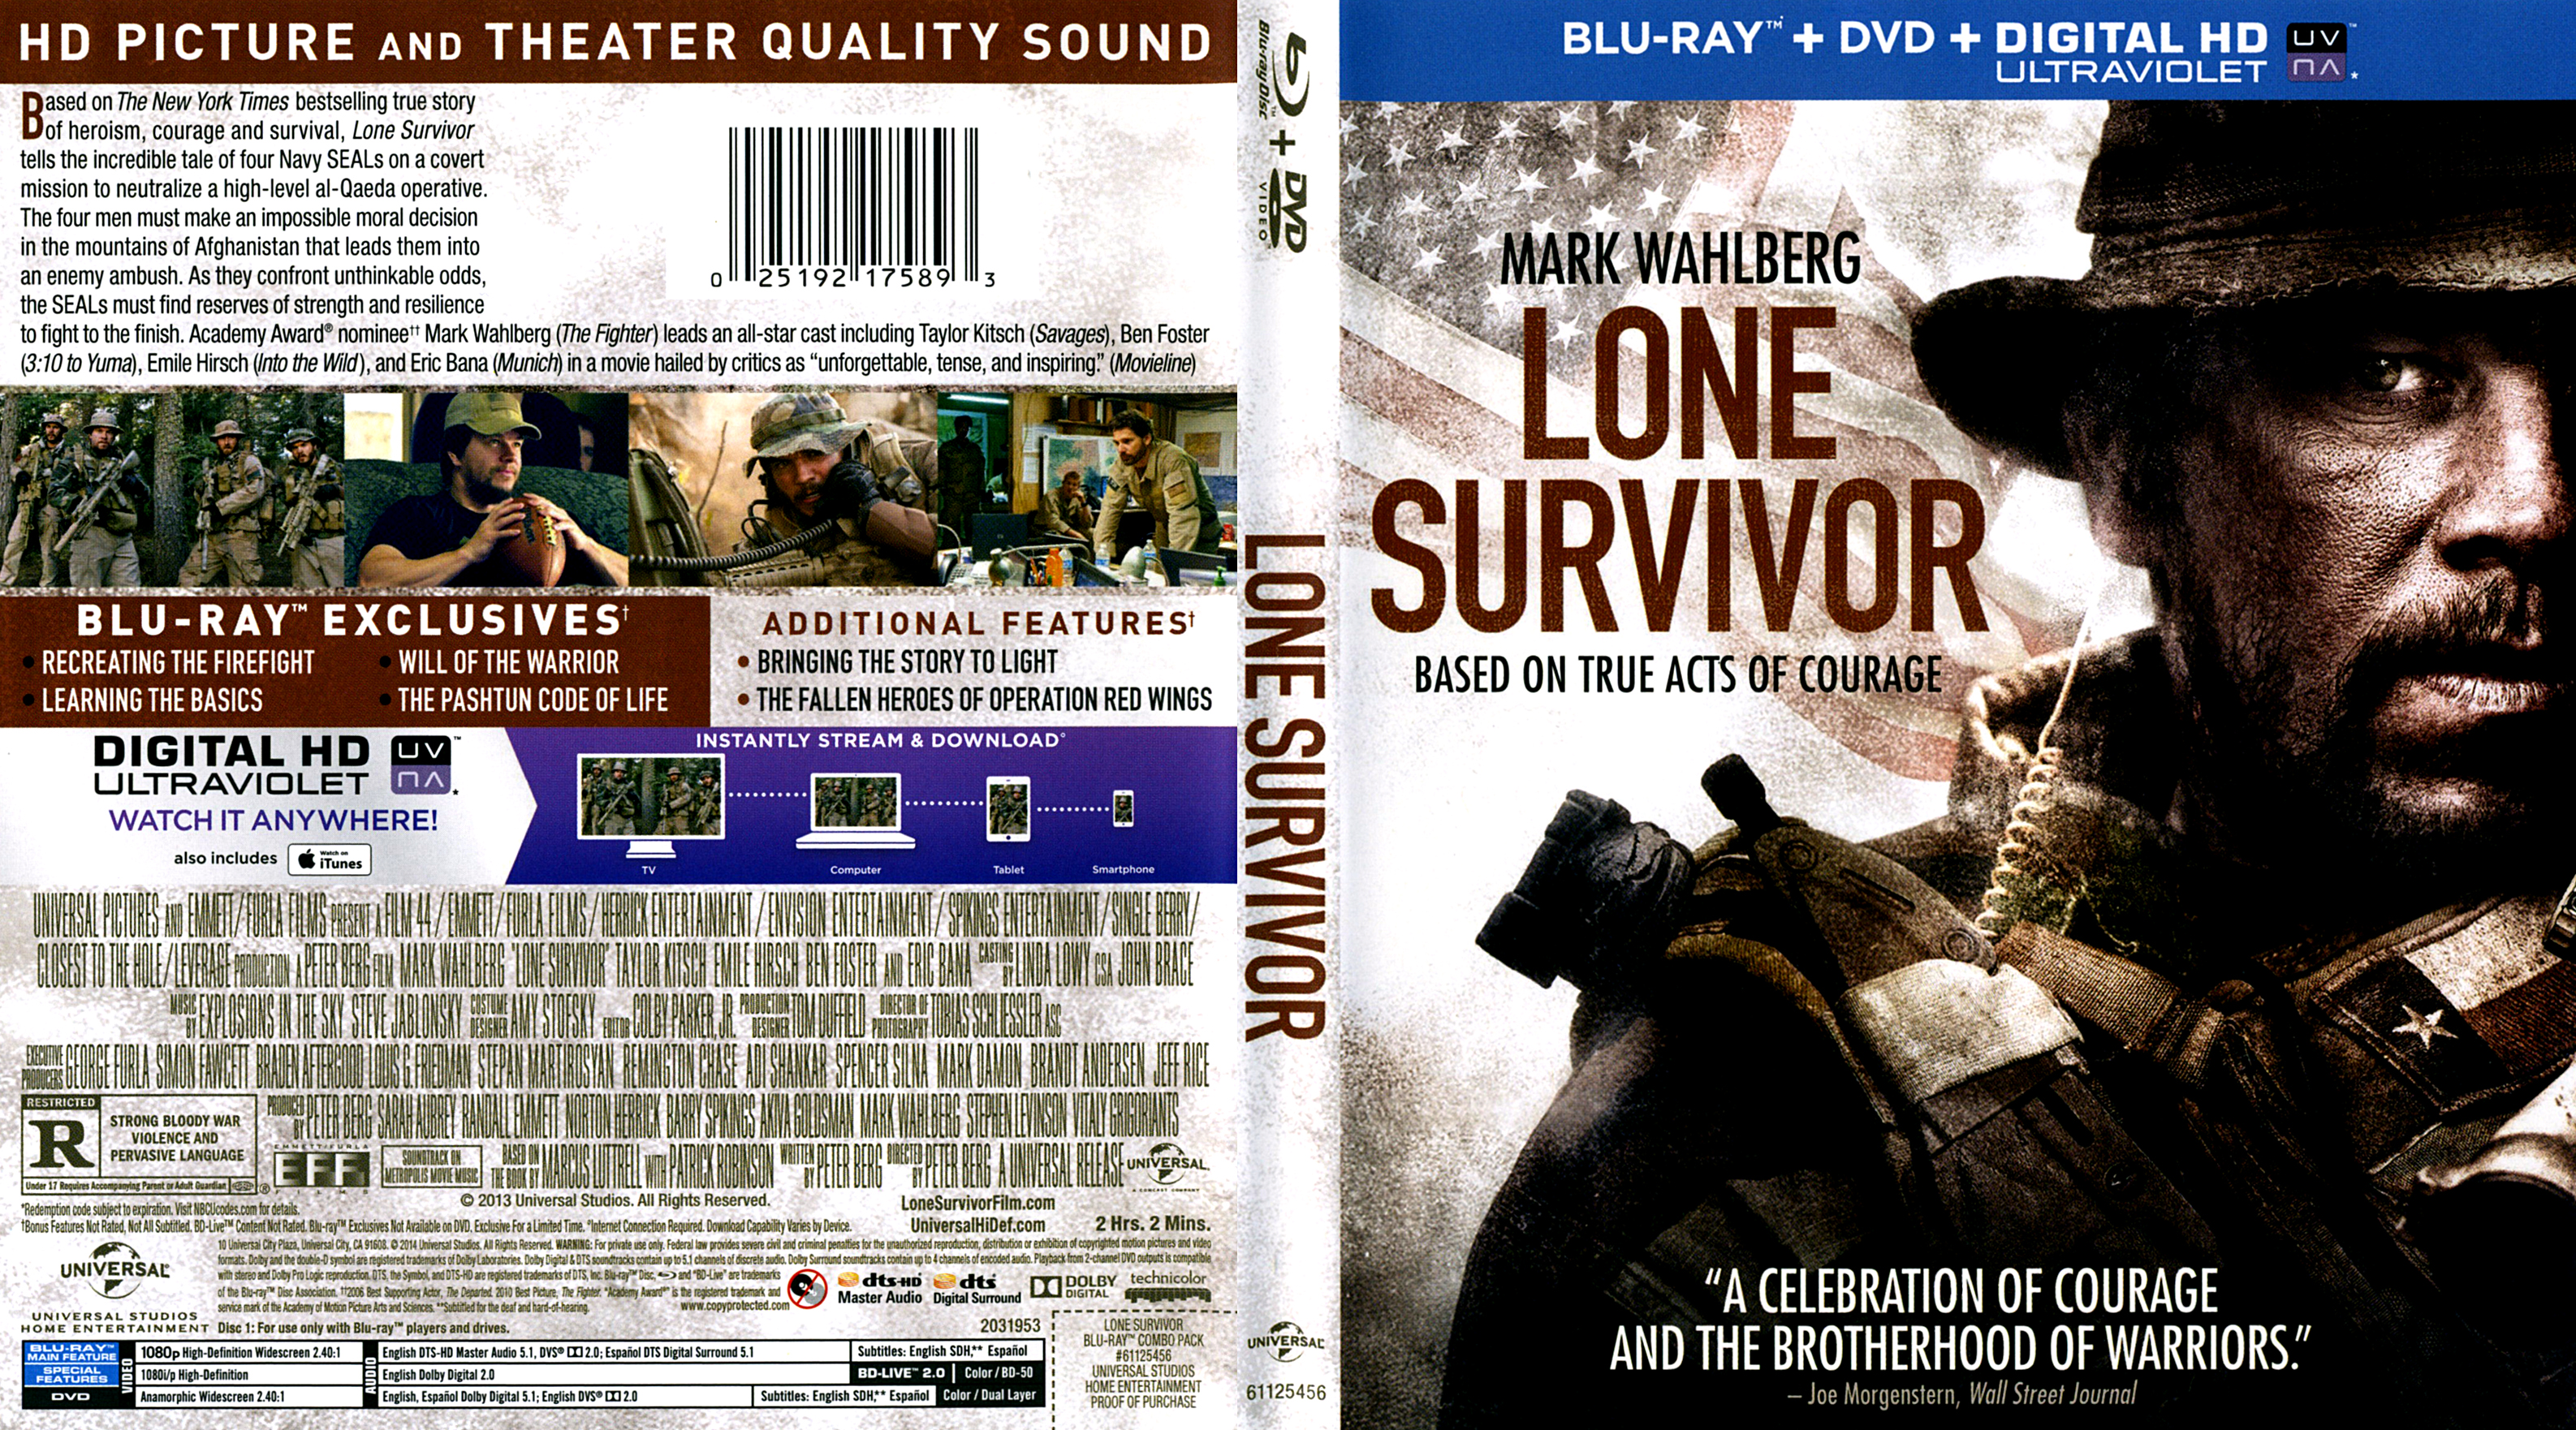 Lone Survivor Blu Ray Covers Cover Century Over 500 000 Album Art Covers For Free